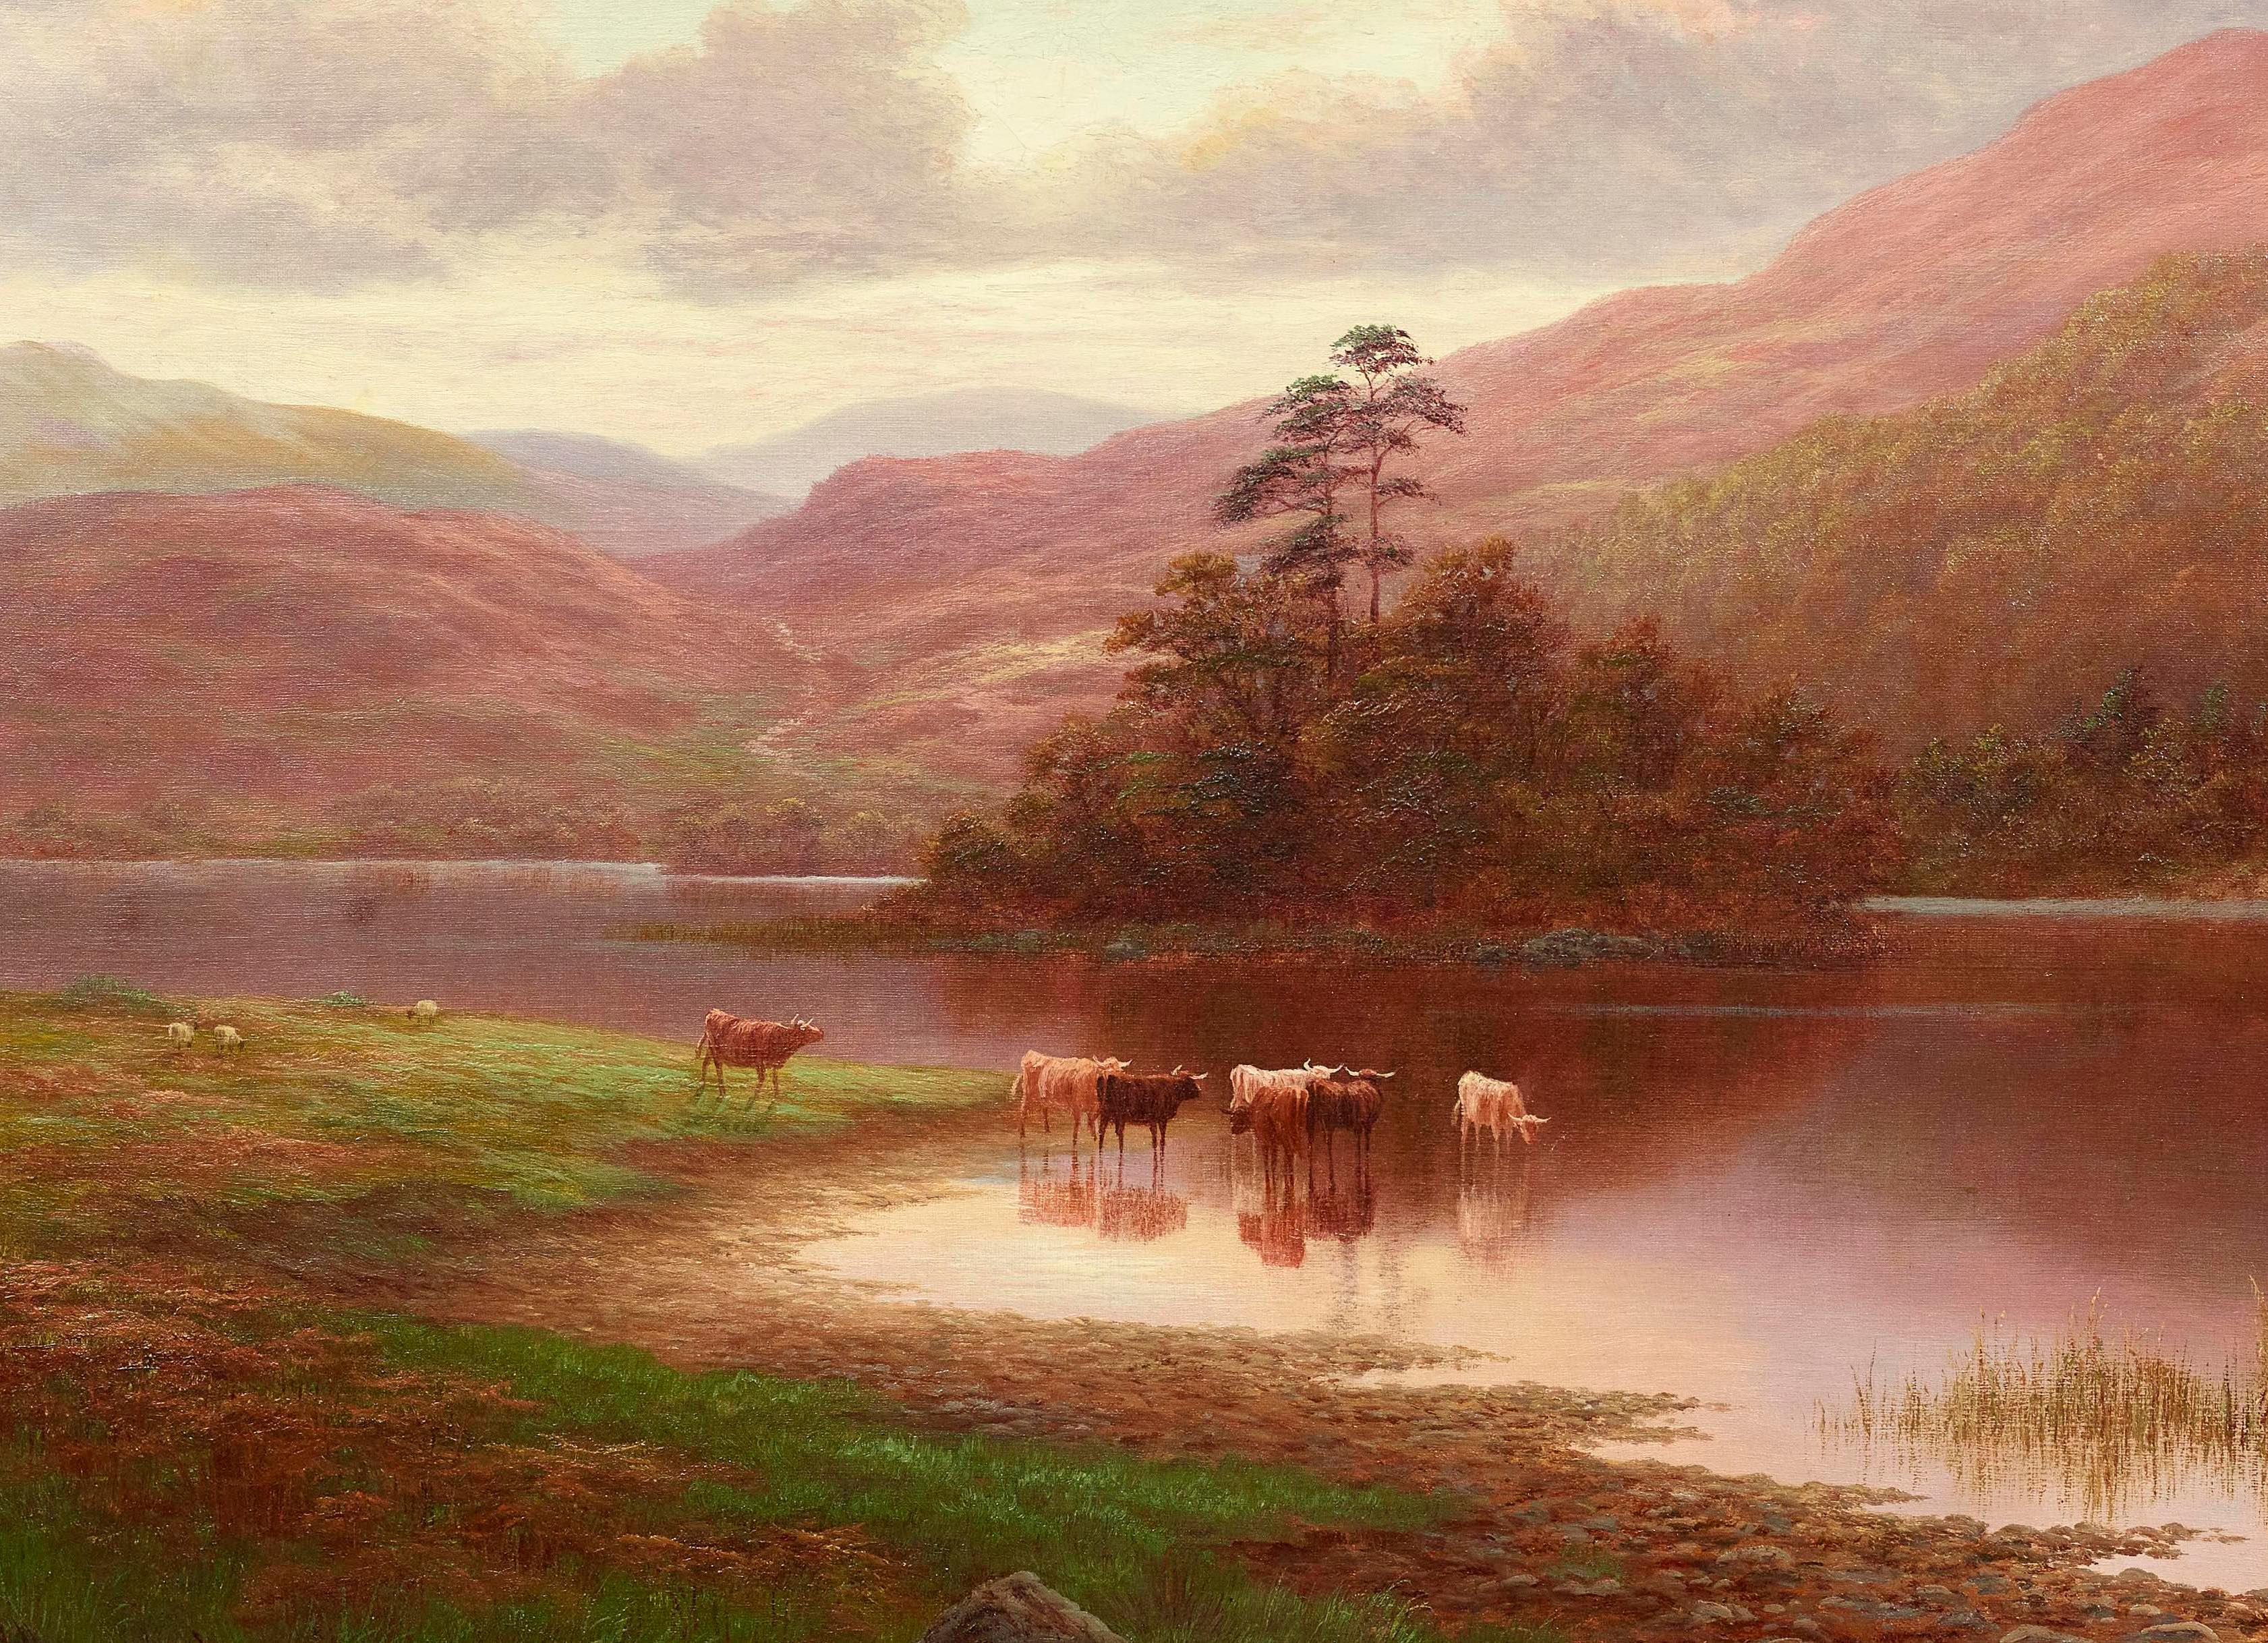 Scottish Landcape Painting 'Rydal Lakes, Westmoreland' by William Mellor 